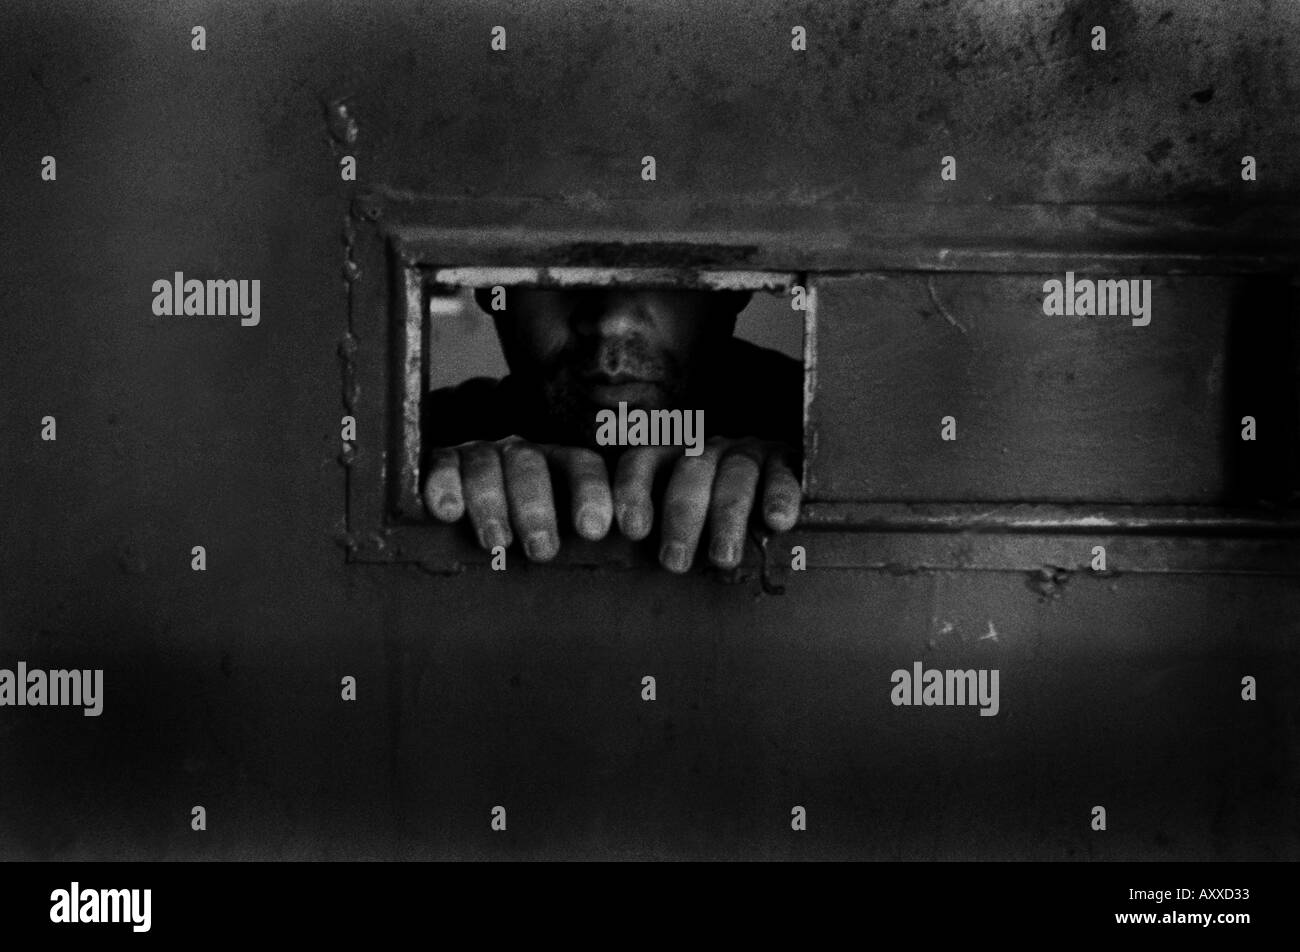 INMATE LOOKING THROUGH FROM HIS SMALL CELL S WINDOW, Sinop Prison, Turkey, 06/03/2005 Stock Photo